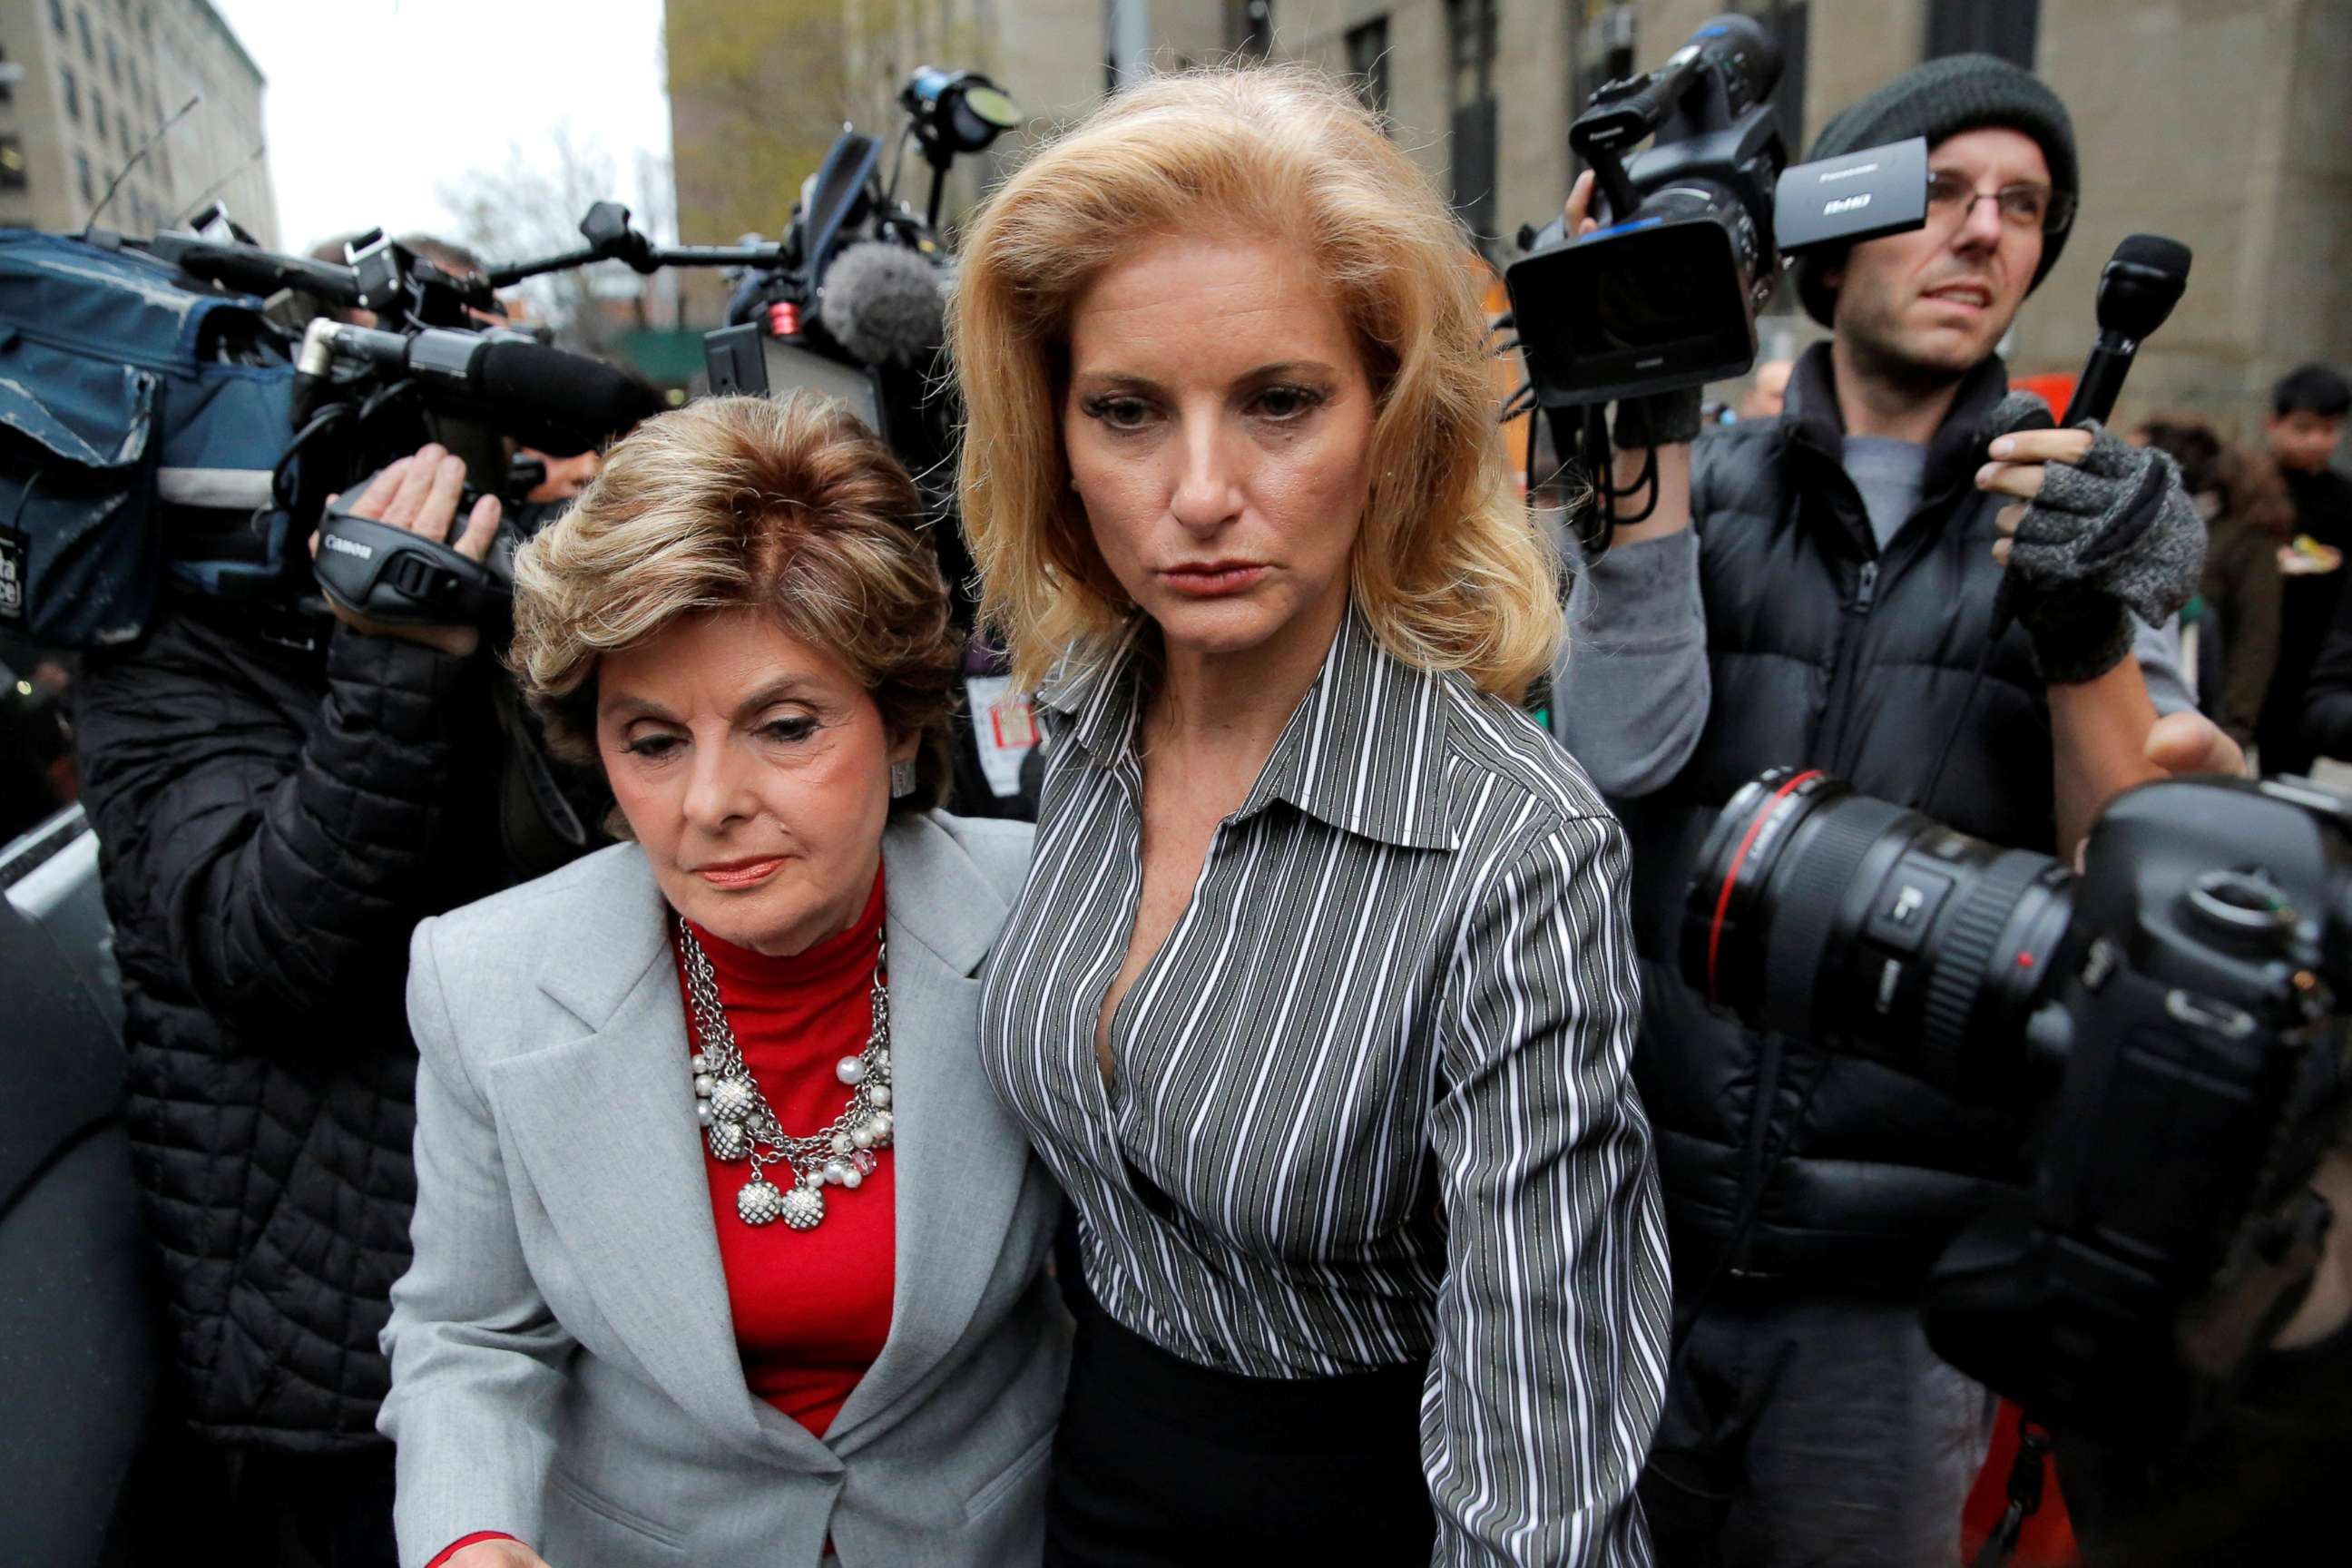 PHOTO: Summer Zervos, right, a former contestant on The Apprentice, leaves New York State Supreme Court with attorney Gloria Allred after a hearing on the defamation case against President Donald Trump in Manhattan, Dec. 5, 2017.